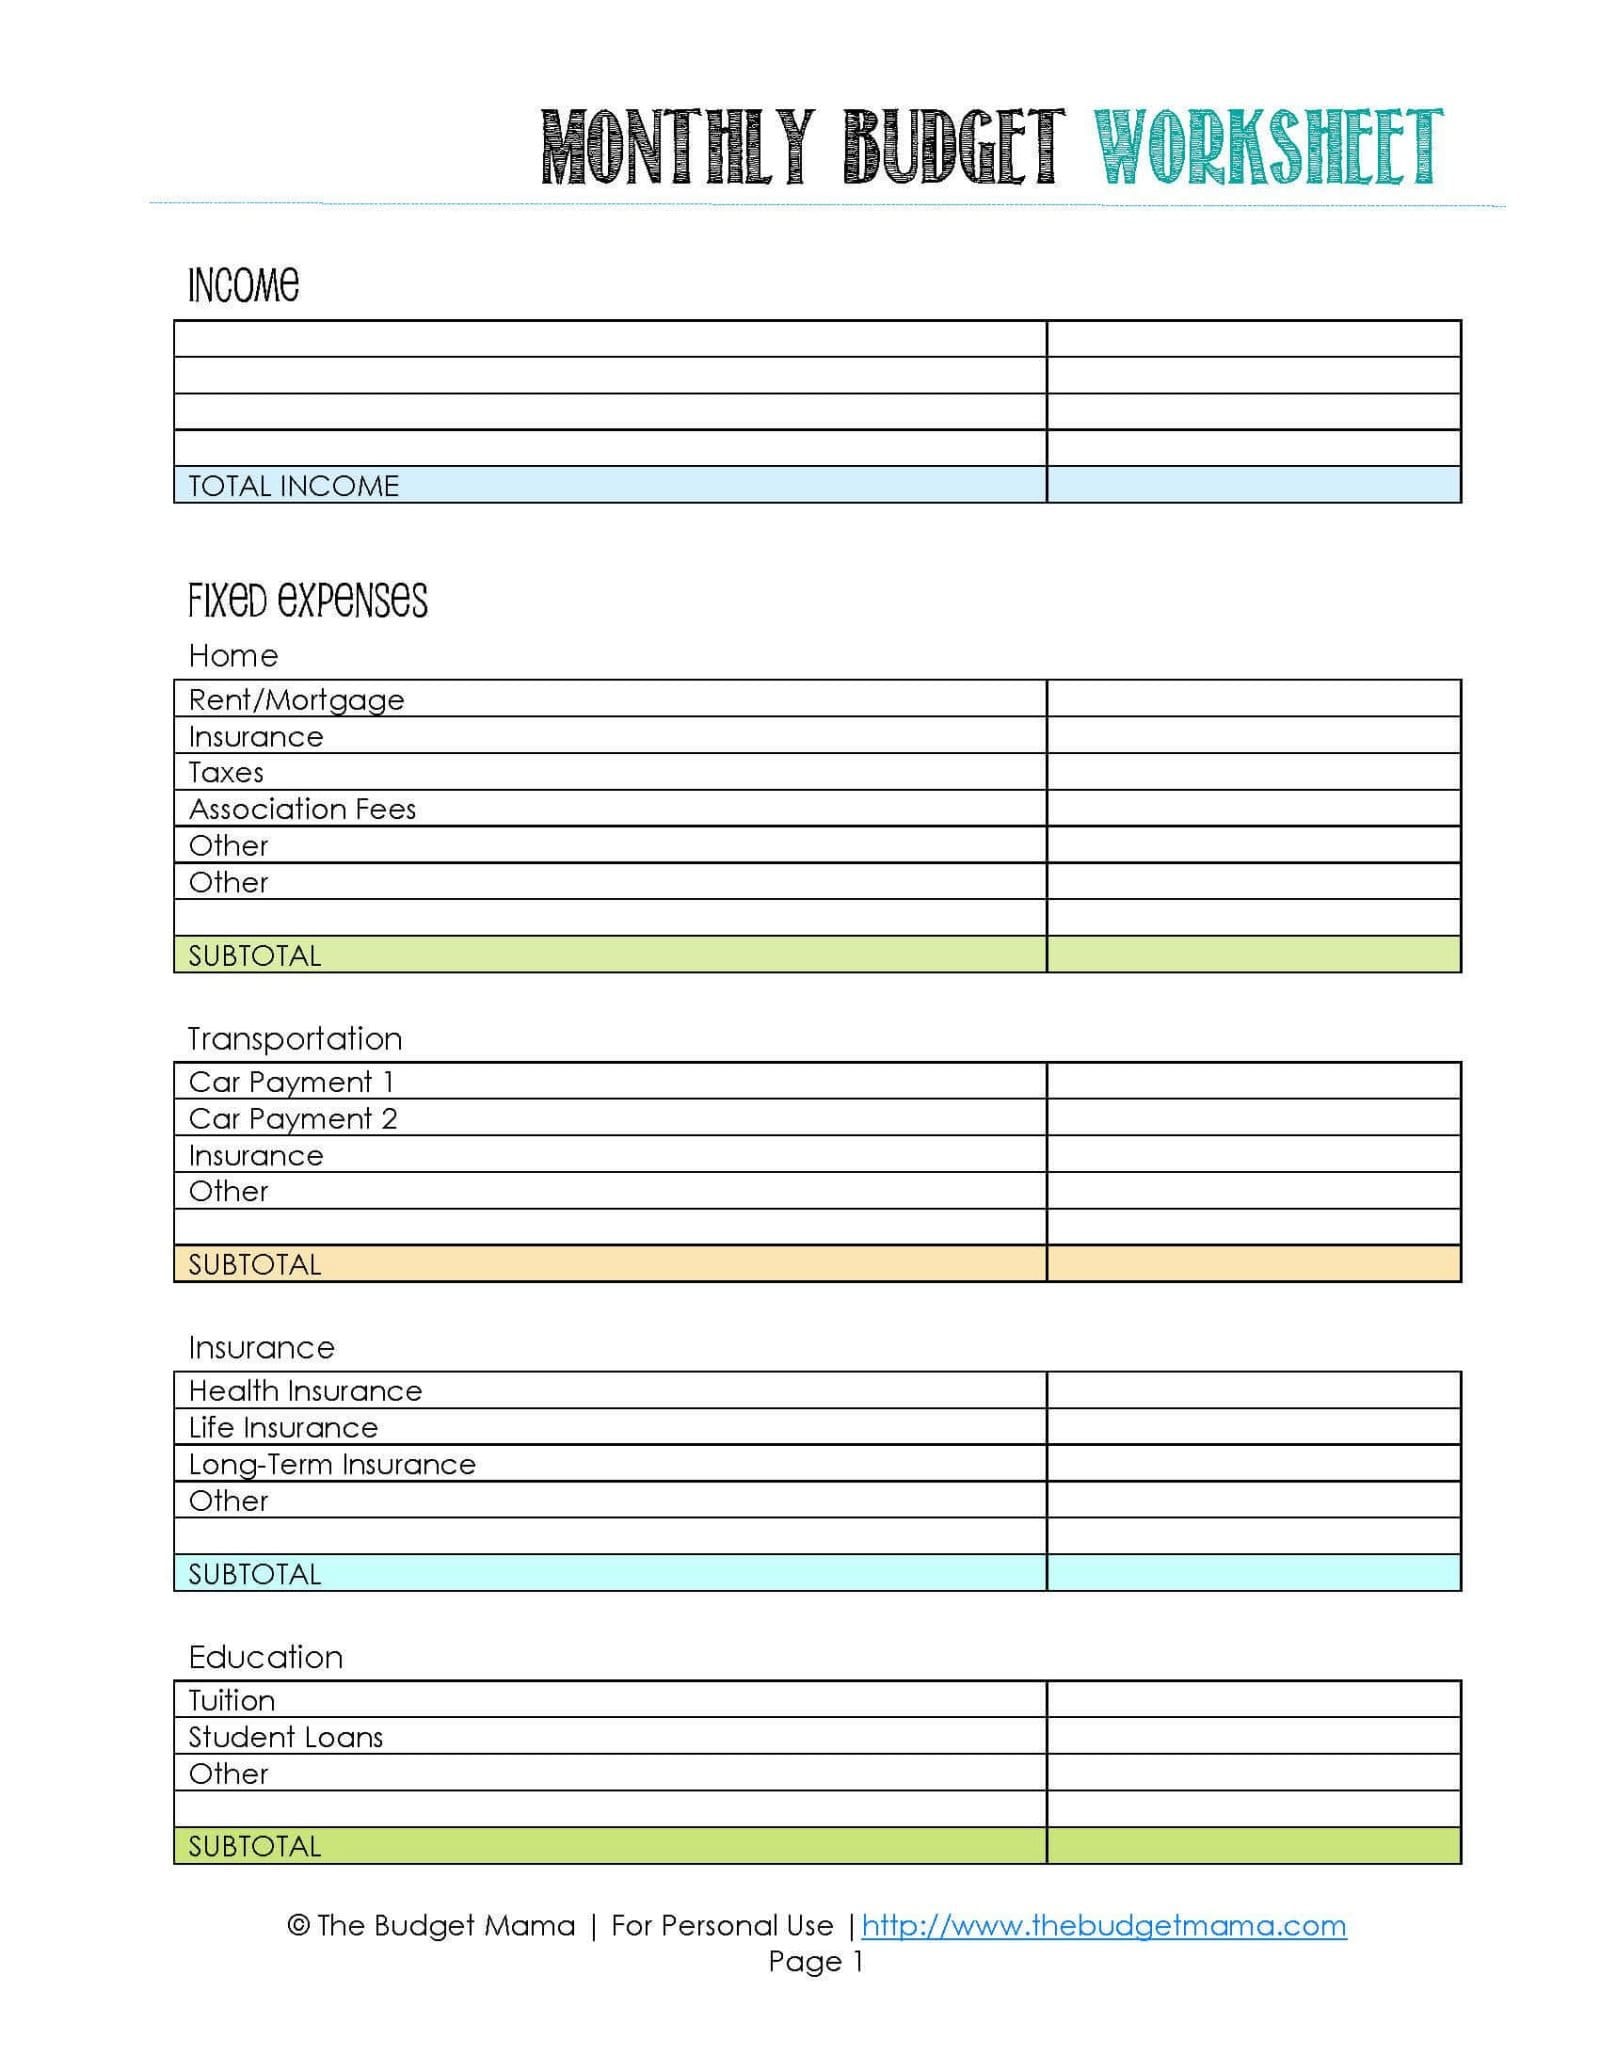 Free Printable Budget Worksheets Dave Ramsey Pdf For College As Well As College Student Budget Worksheet